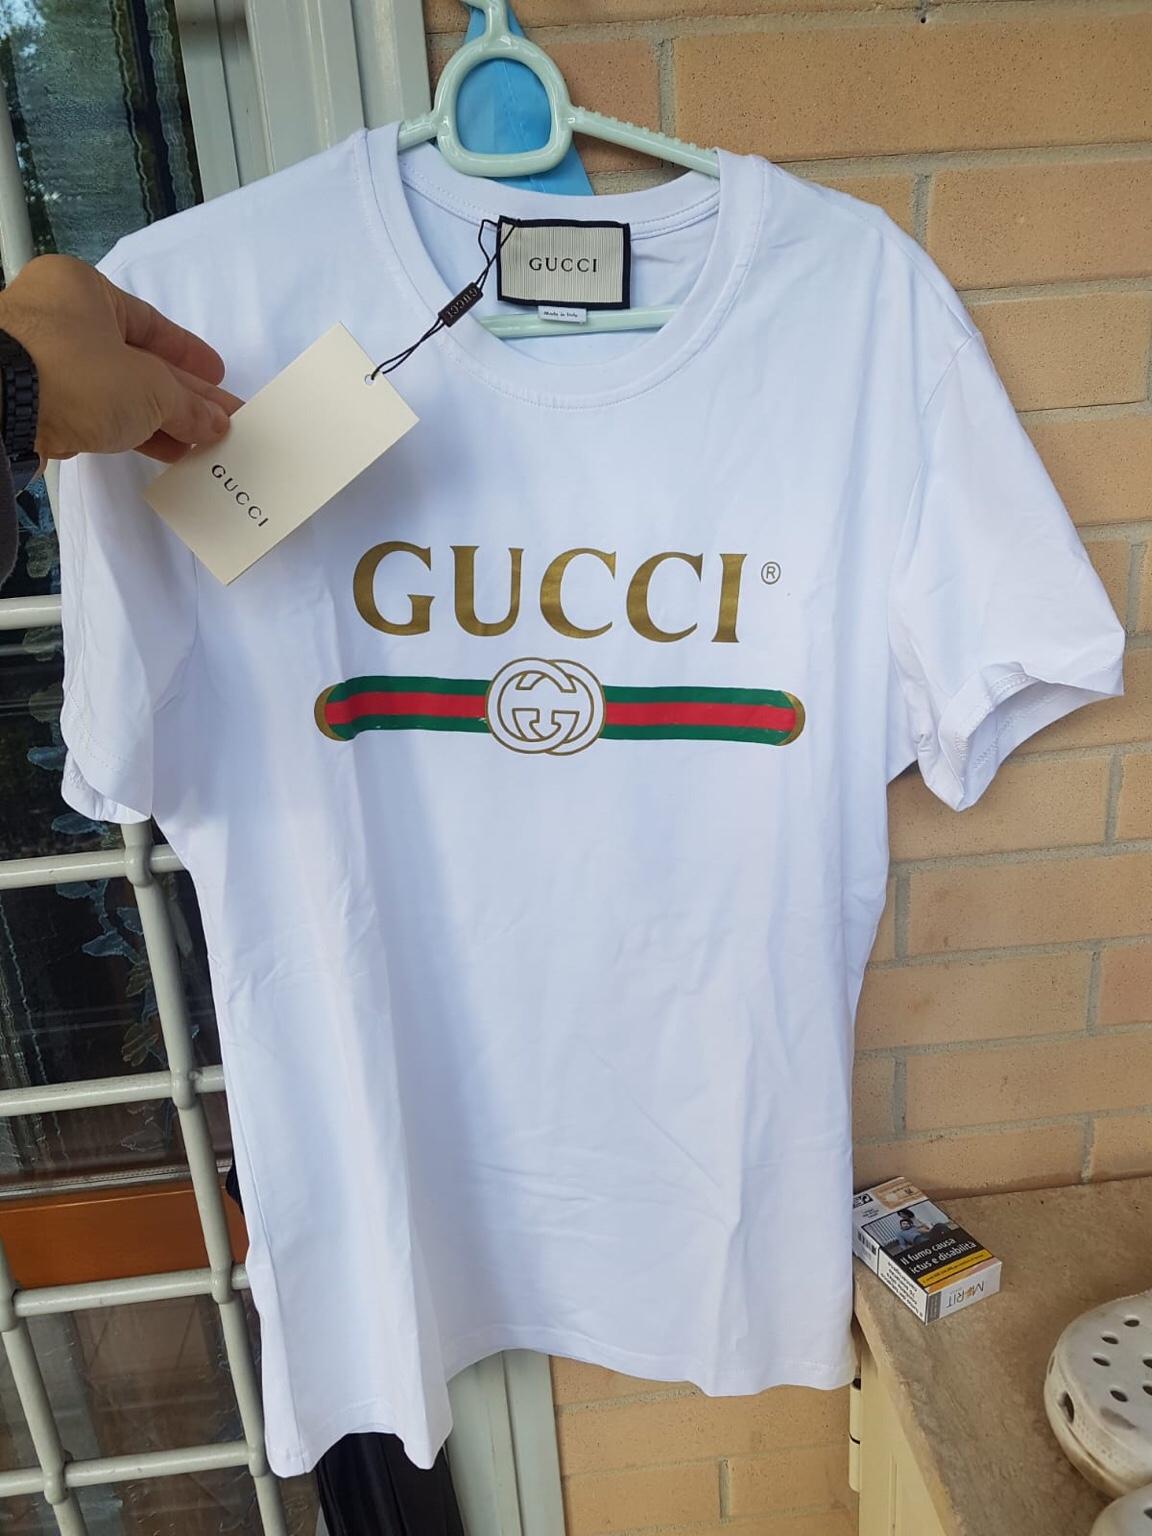 T Shirt Gucci bianca con logo rosso verde in 00135 Roma for €30.00 for